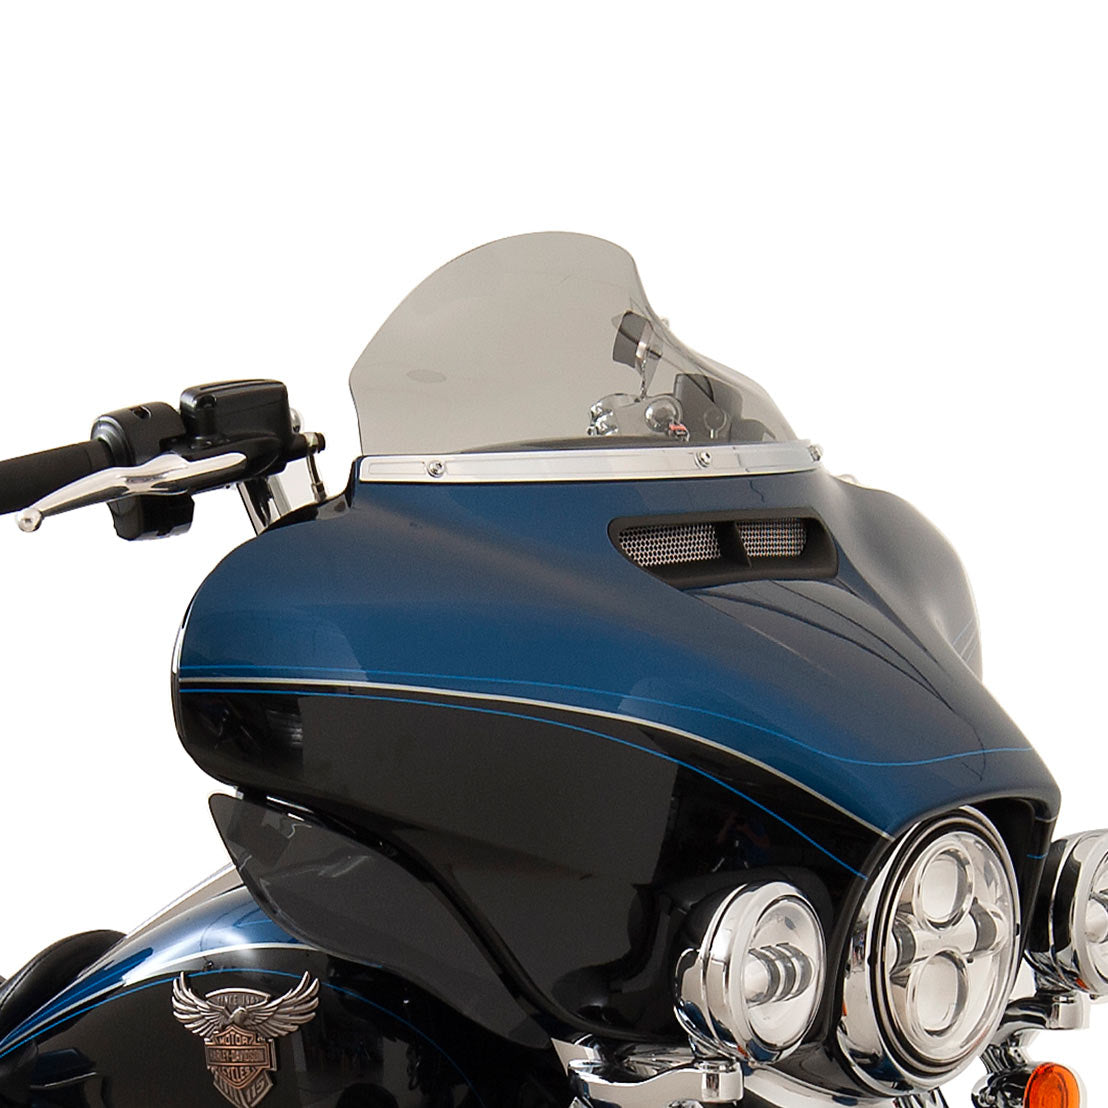 6.5" Tint Flare™ Windshield for 2014-2023 Harley-Davidson FLH Motorcycle Models(6.5" Tint)